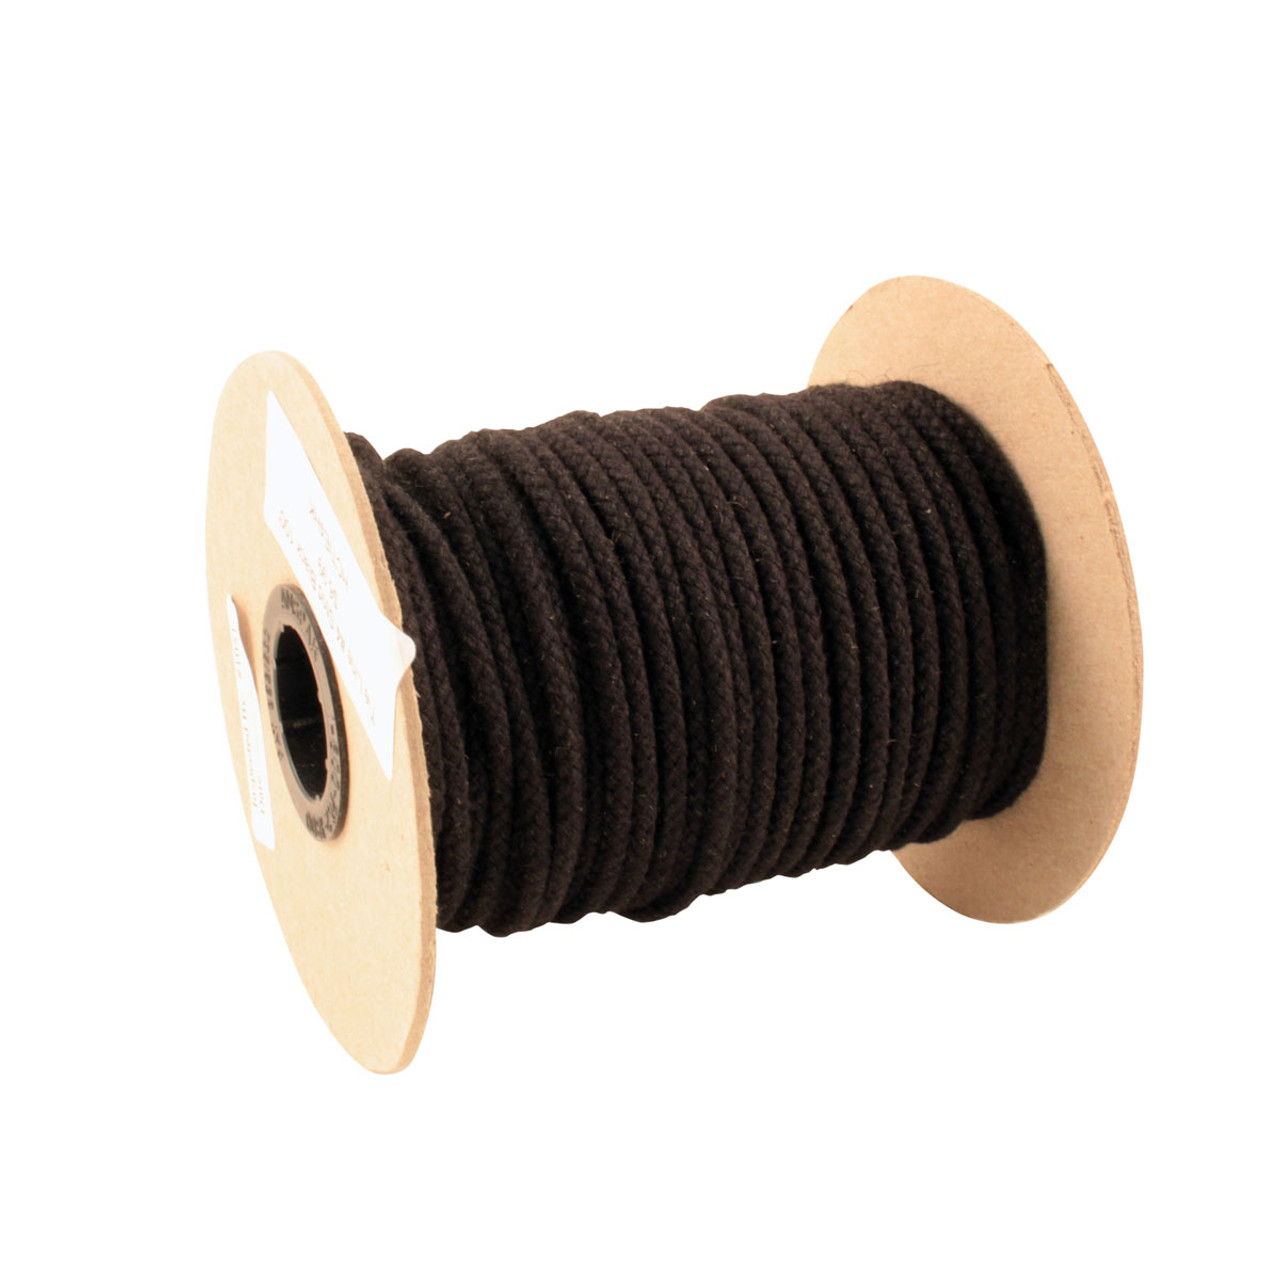 4 Black Cotton Waxed Tie Line, Scenic Supplies for Stage & Theater